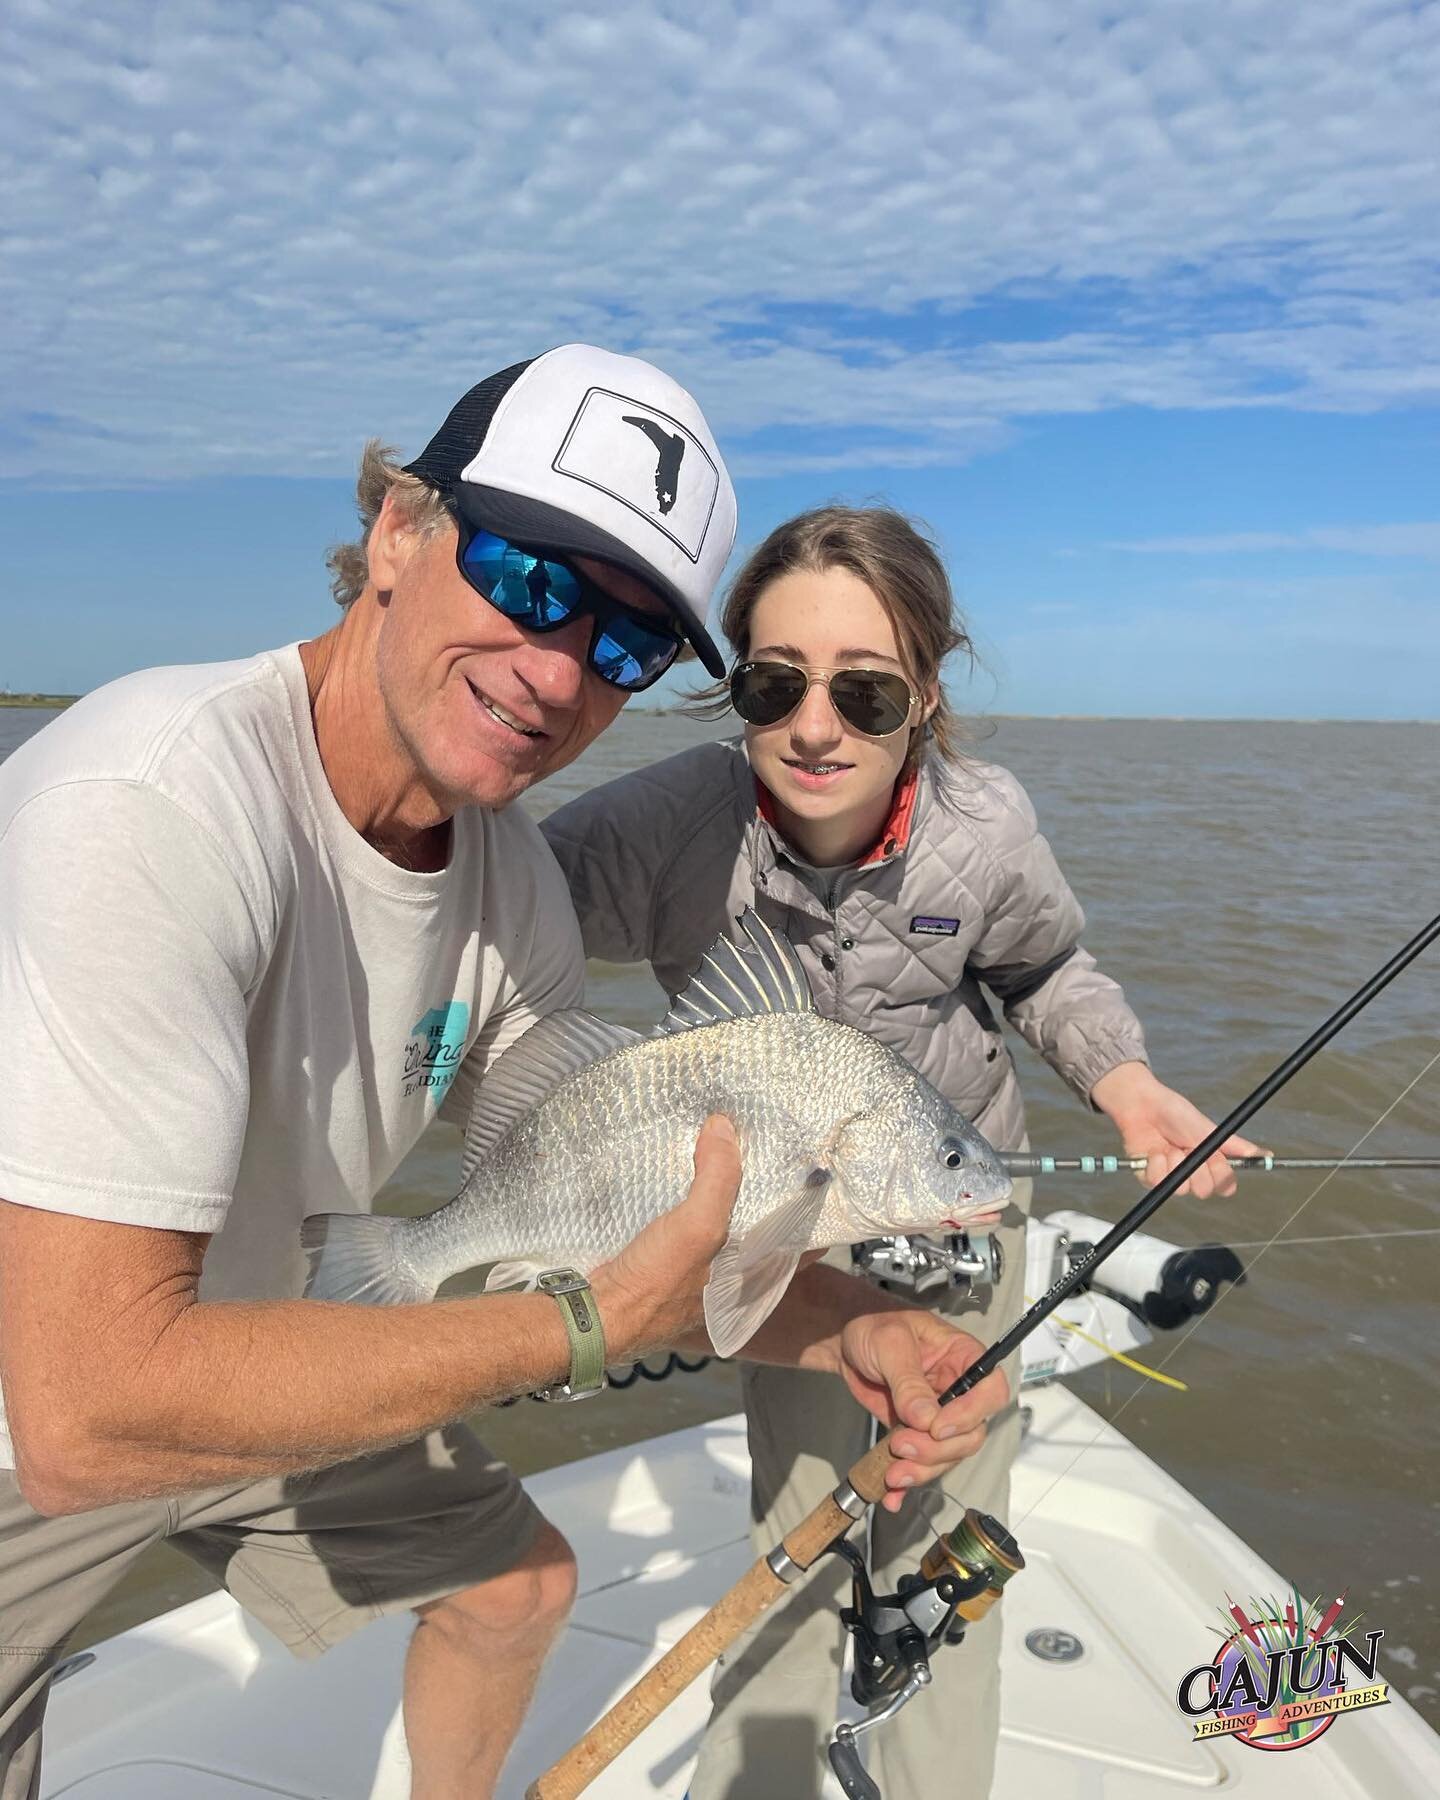 Discover the beauty and excitement of the Louisiana delta with Cajun Fishing Adventures &ndash; the go-to for fishing. See for yourself on our website!⠀
⠀
⠀
⠀
⠀
@yamahaoutboards @power.pole @skeeter_boats @zmanfishingproducts @simradyachting⠀
#cfalod